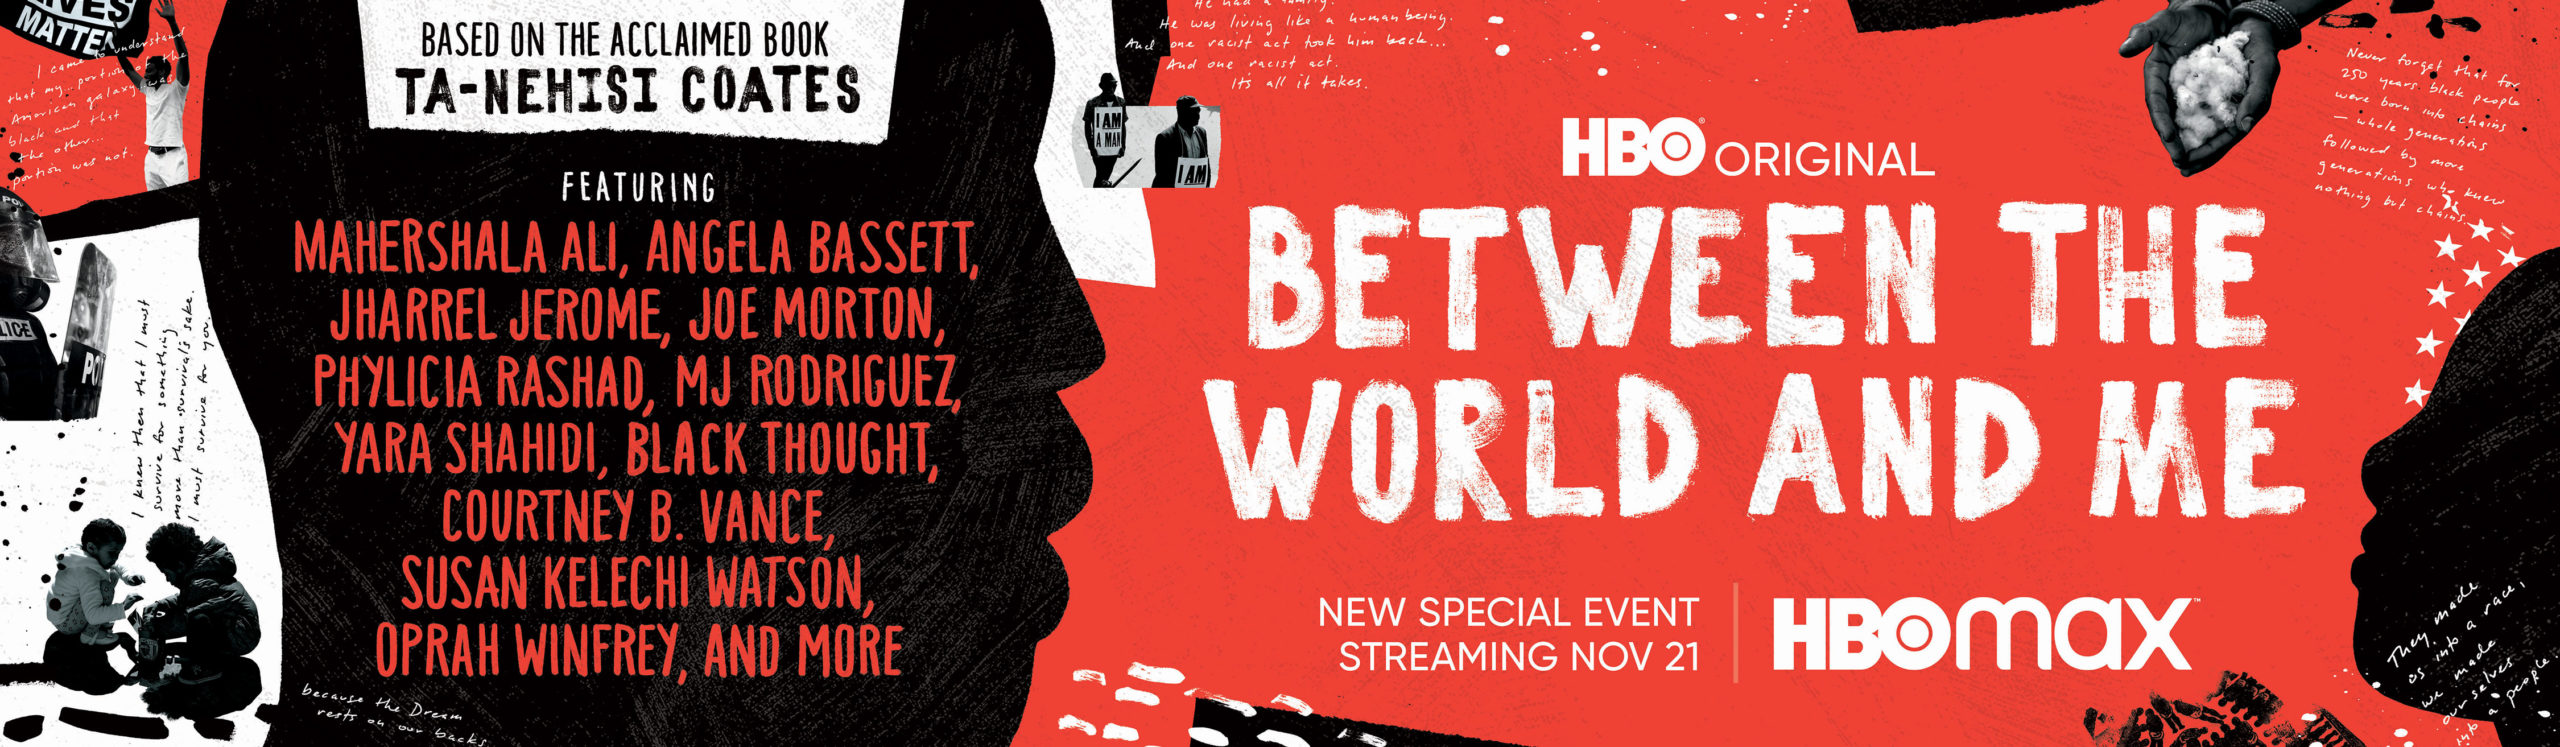 HBO Original Between the World and Me